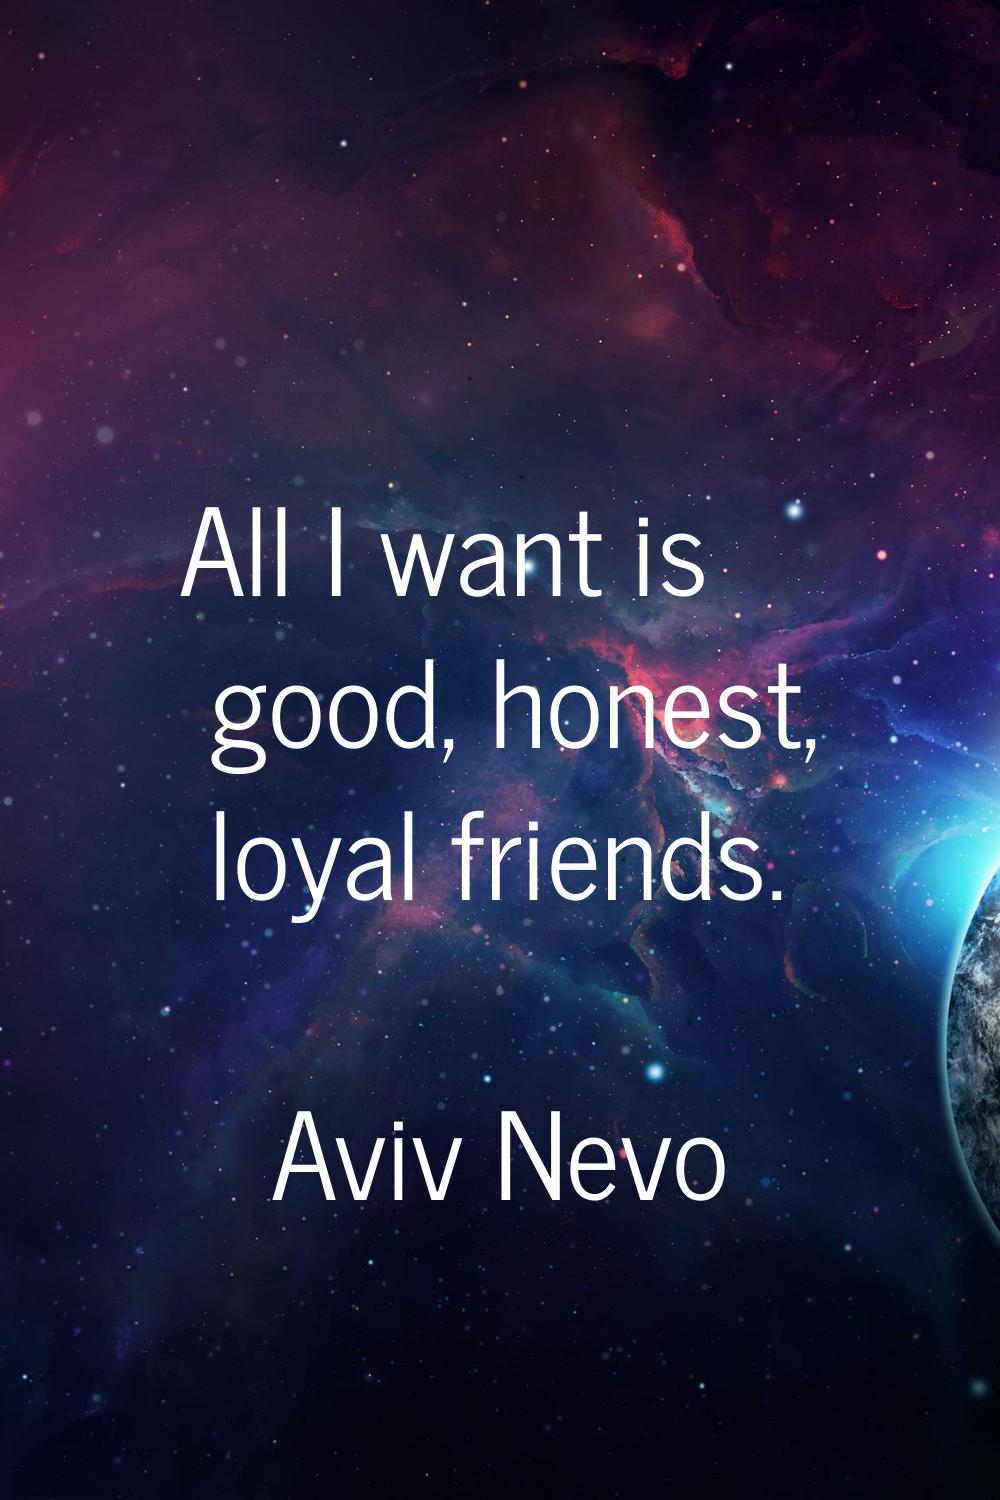 All I want is good, honest, loyal friends.